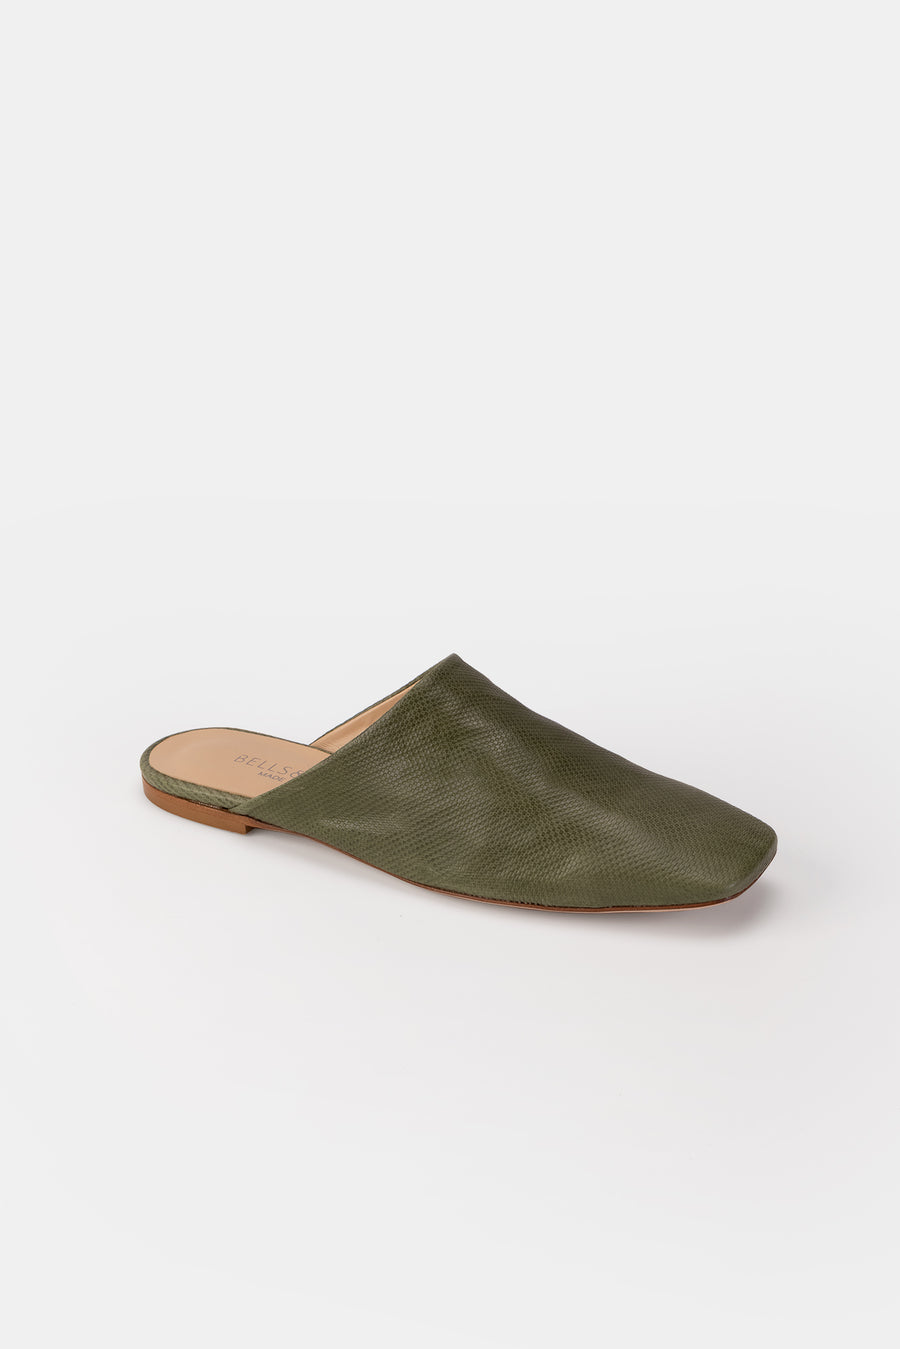 The Antonia Olive - Final Sale